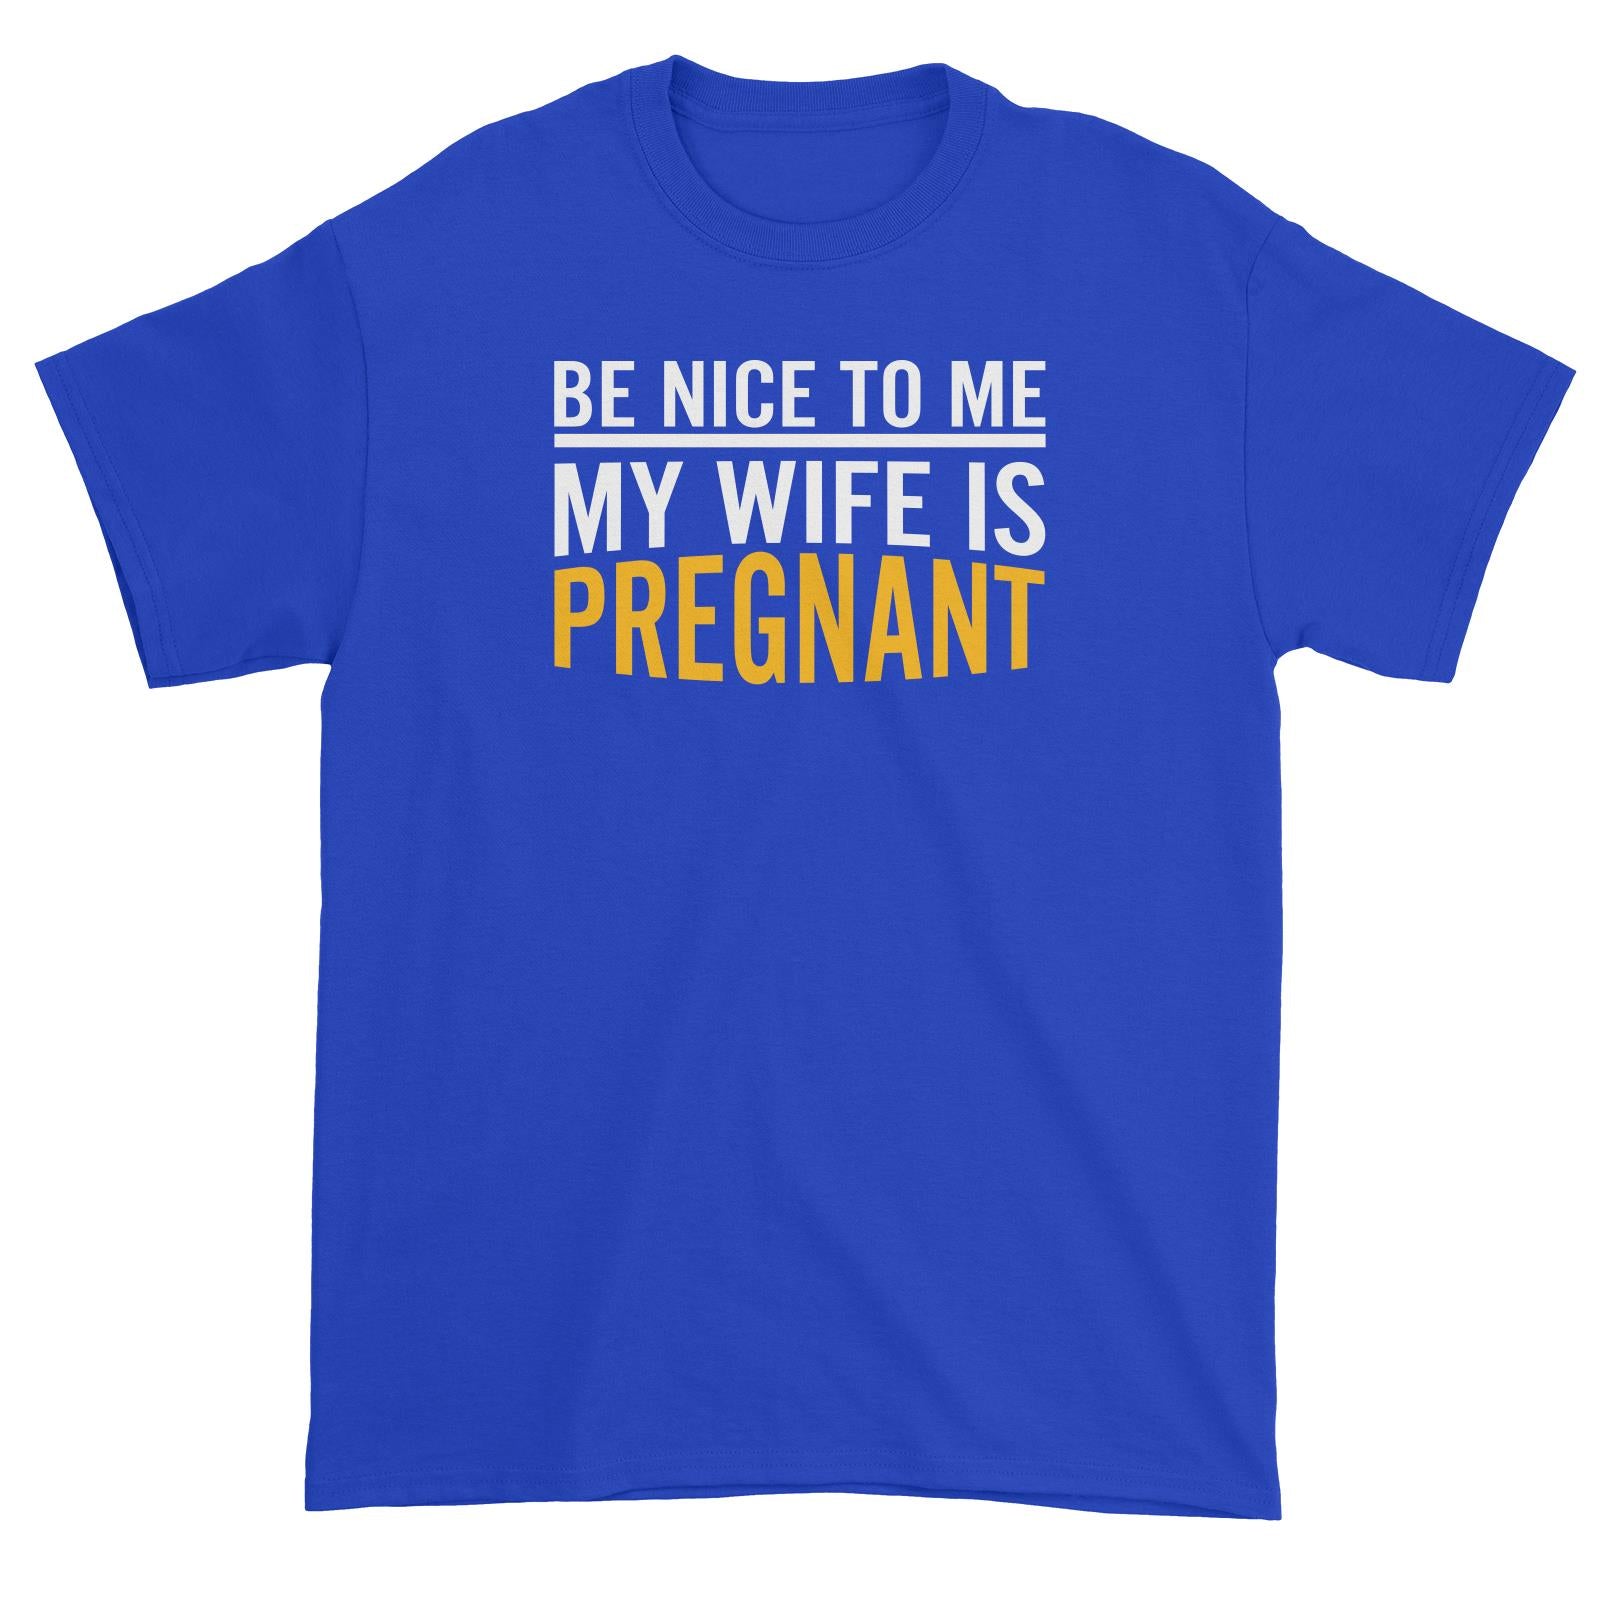 Be Nice To Me My Wife Is Pregnant Unisex T-Shirt Matching Family Pregnancy Funny Fatherhood